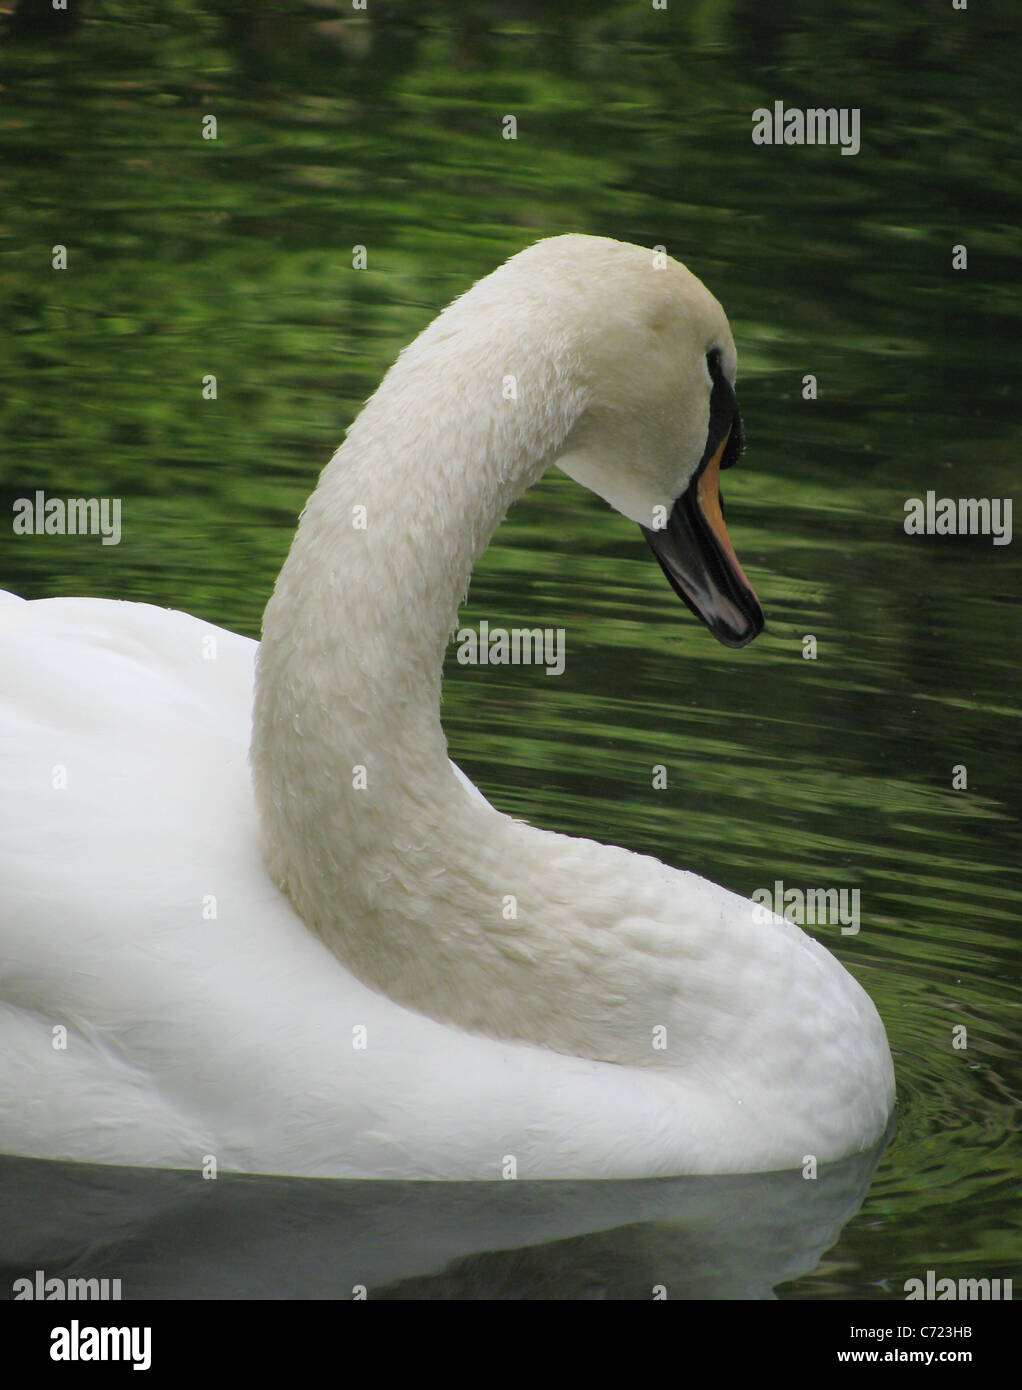 Gentle white swan Banque D'Images